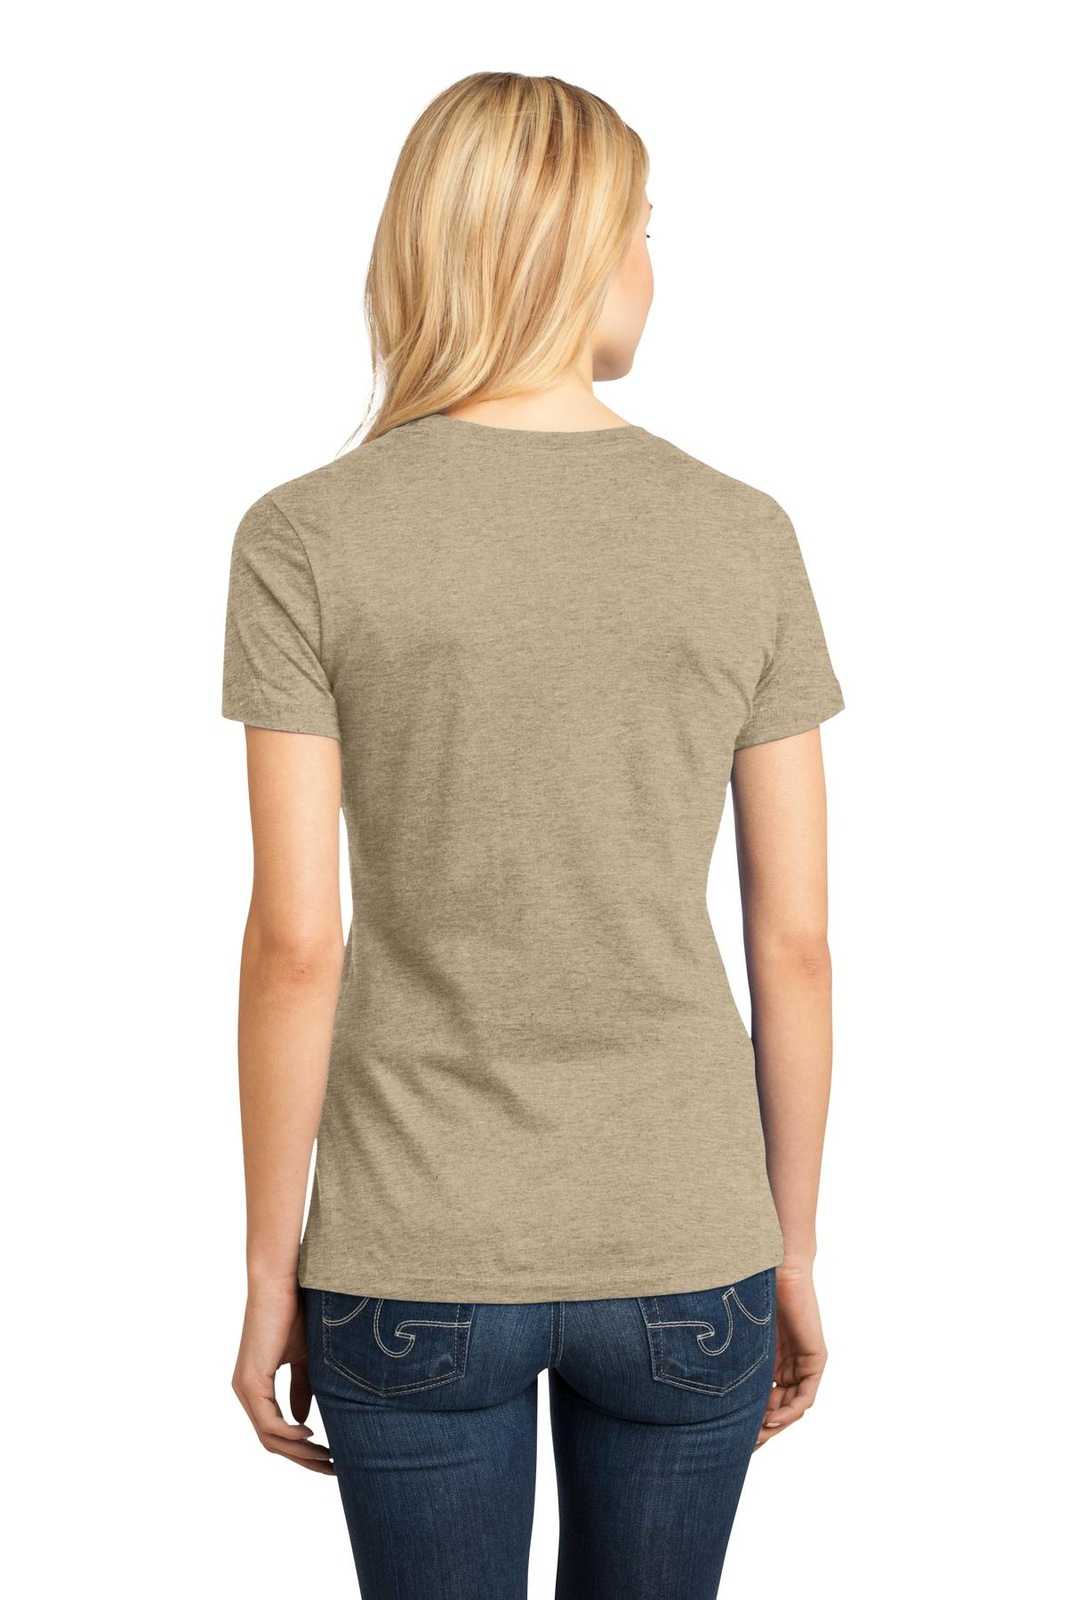 District DM104L Women's Perfect Weighttee - Heathered Latte - HIT a Double - 1